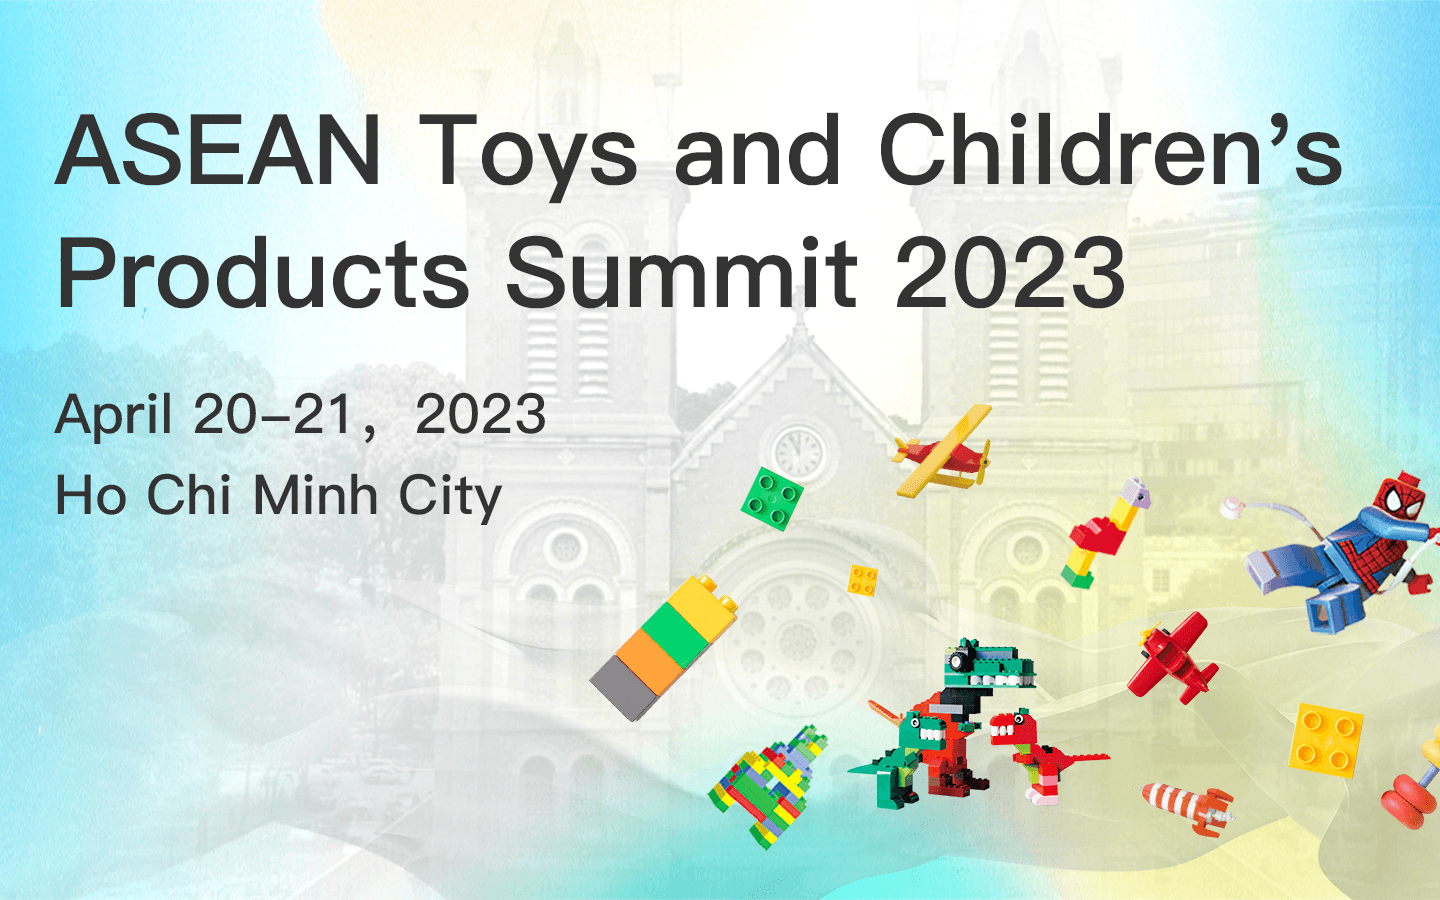 ASEAN Toys And Children’s Products Summit 2023